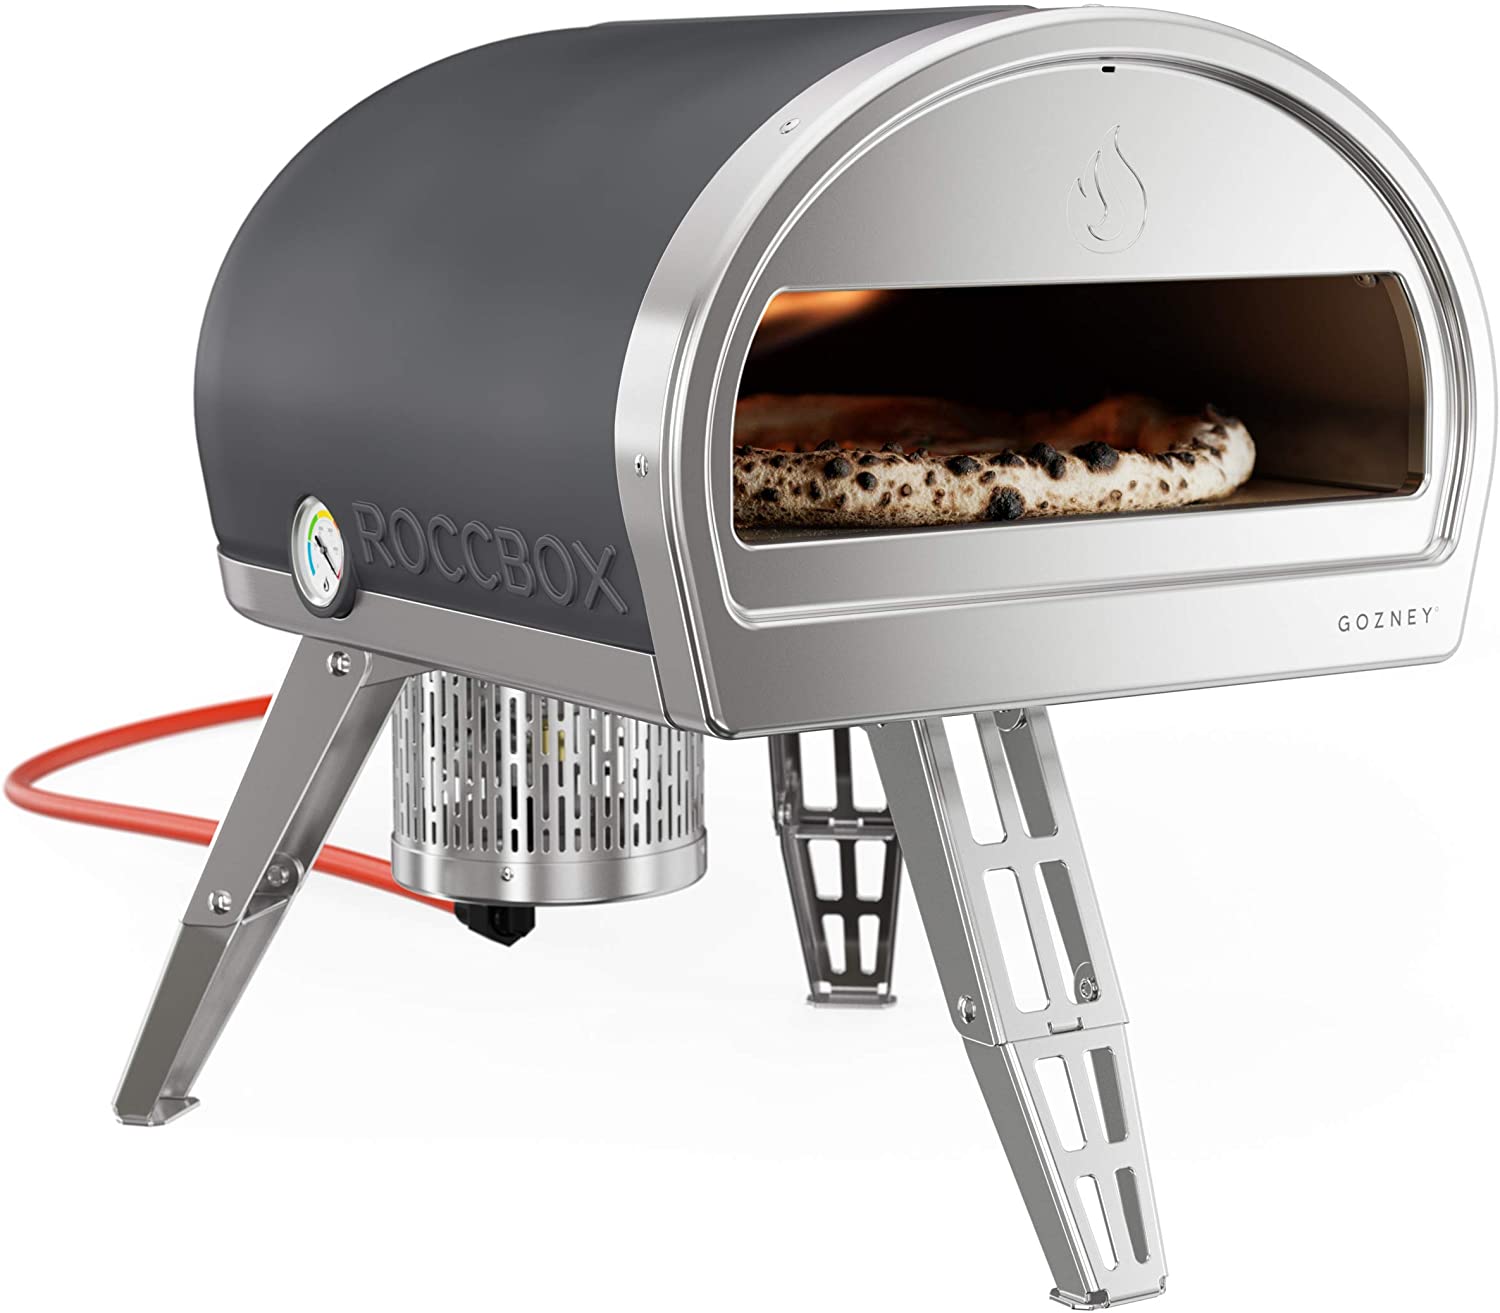 Roccbox Gozney Portable Outdoor Pizza Oven - Includes Professional Grade Pizza Peel, Built-in Thermometer and Safe Touch Silicone Jacket - Propane Gas Fired, with Rolling Wood Flame - (Grey) - image 3 of 7